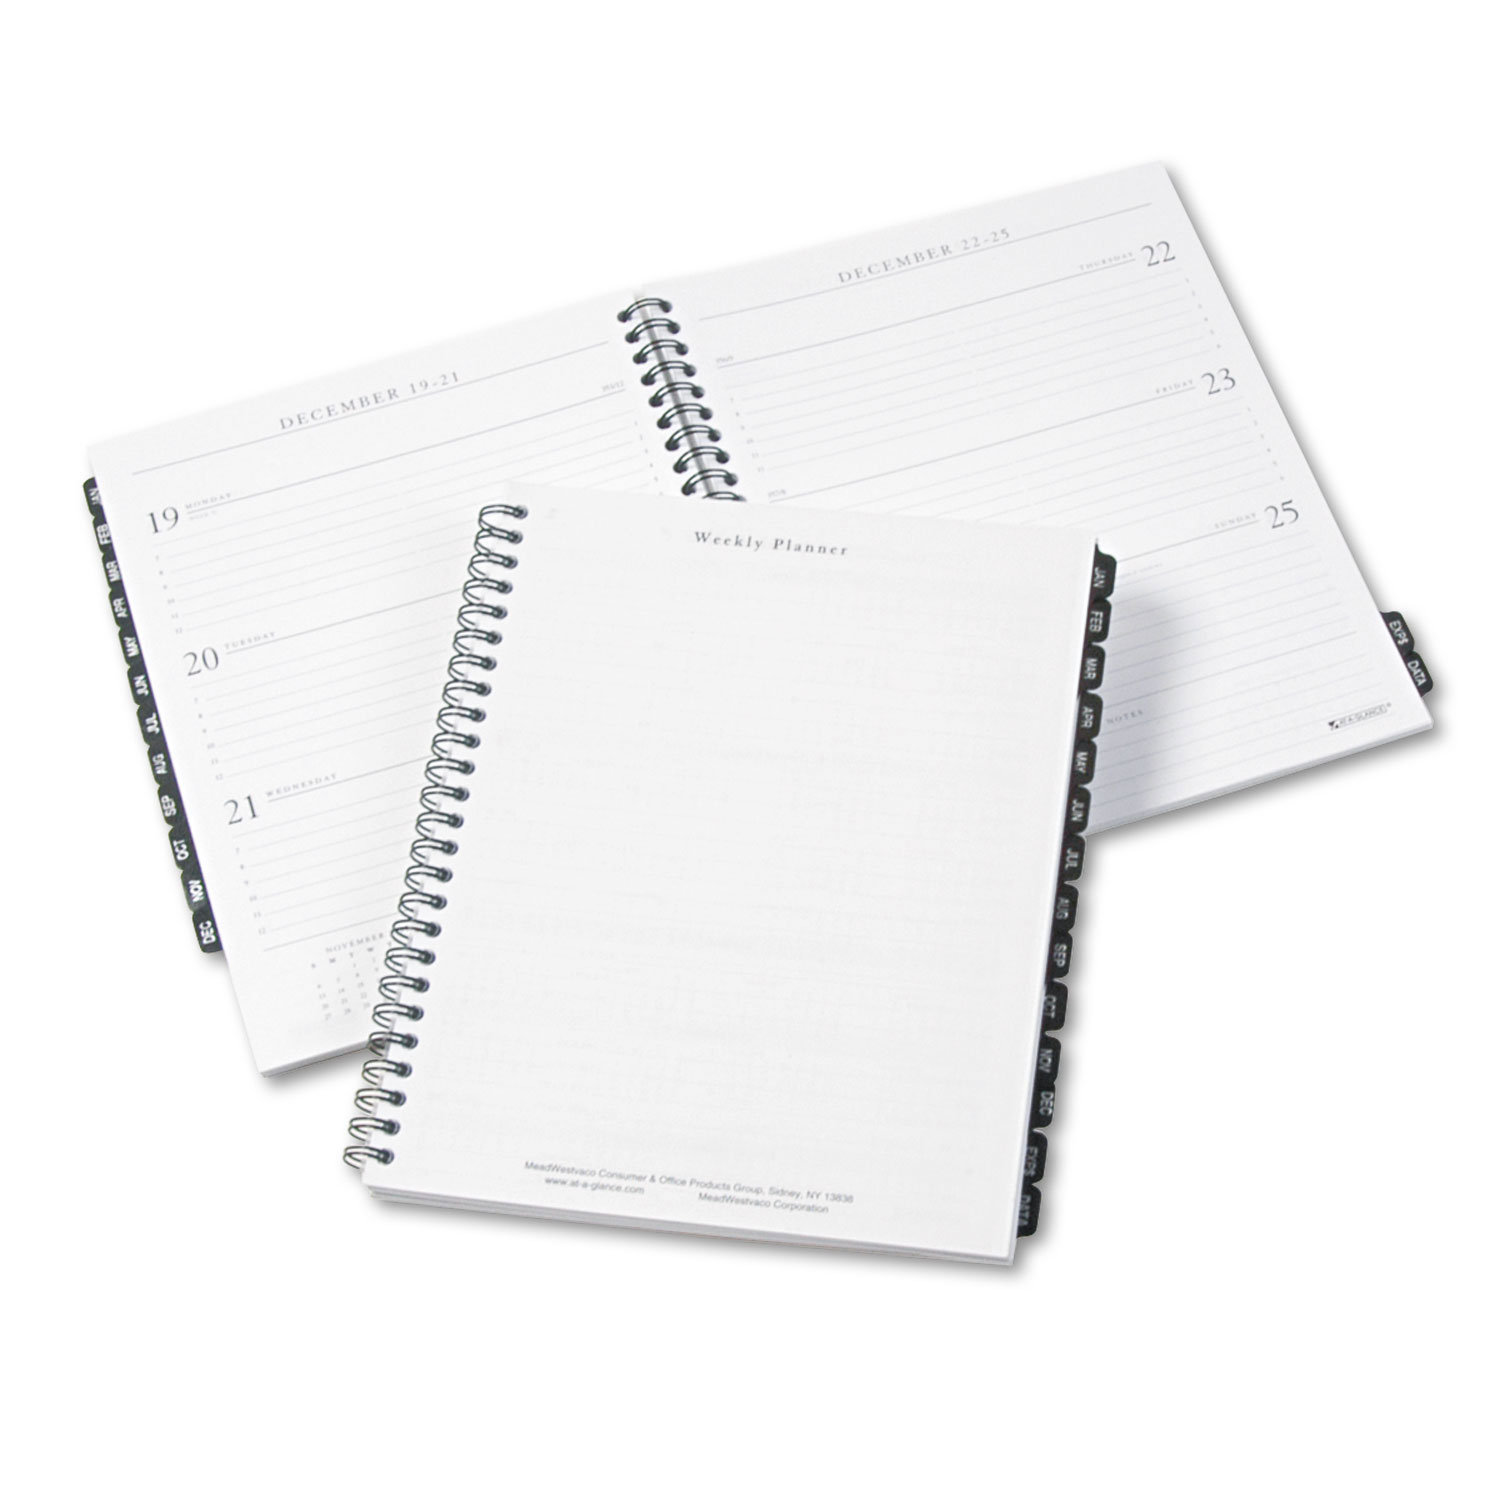 Acco AtAGlance Executive Weekly/Monthly Planner Refill with Hourly